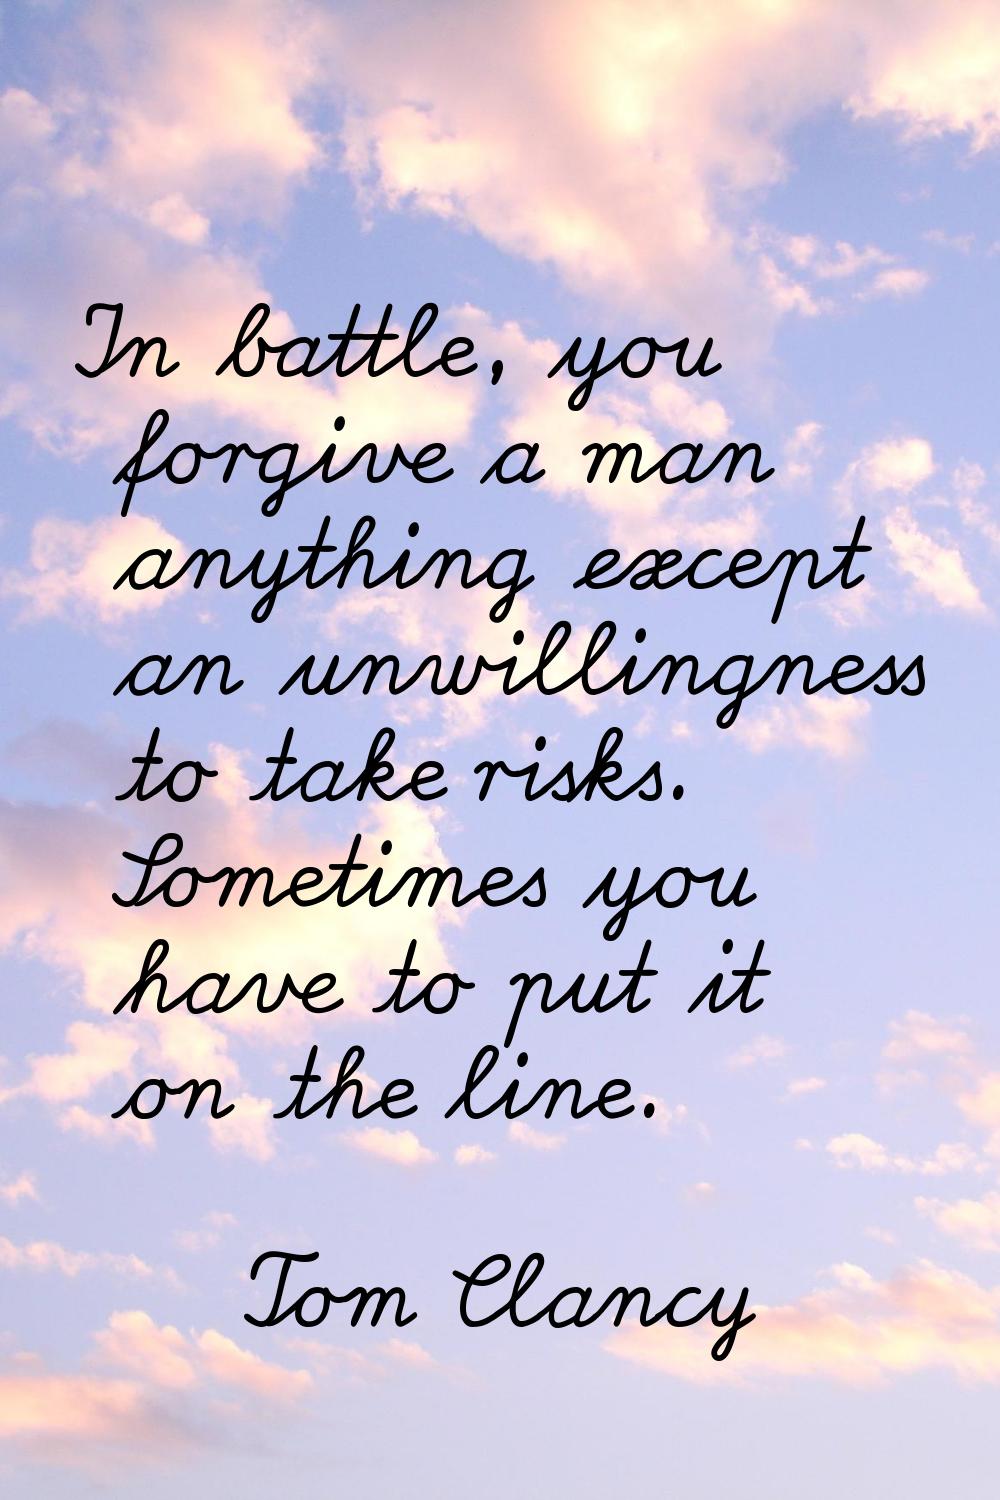 In battle, you forgive a man anything except an unwillingness to take risks. Sometimes you have to 